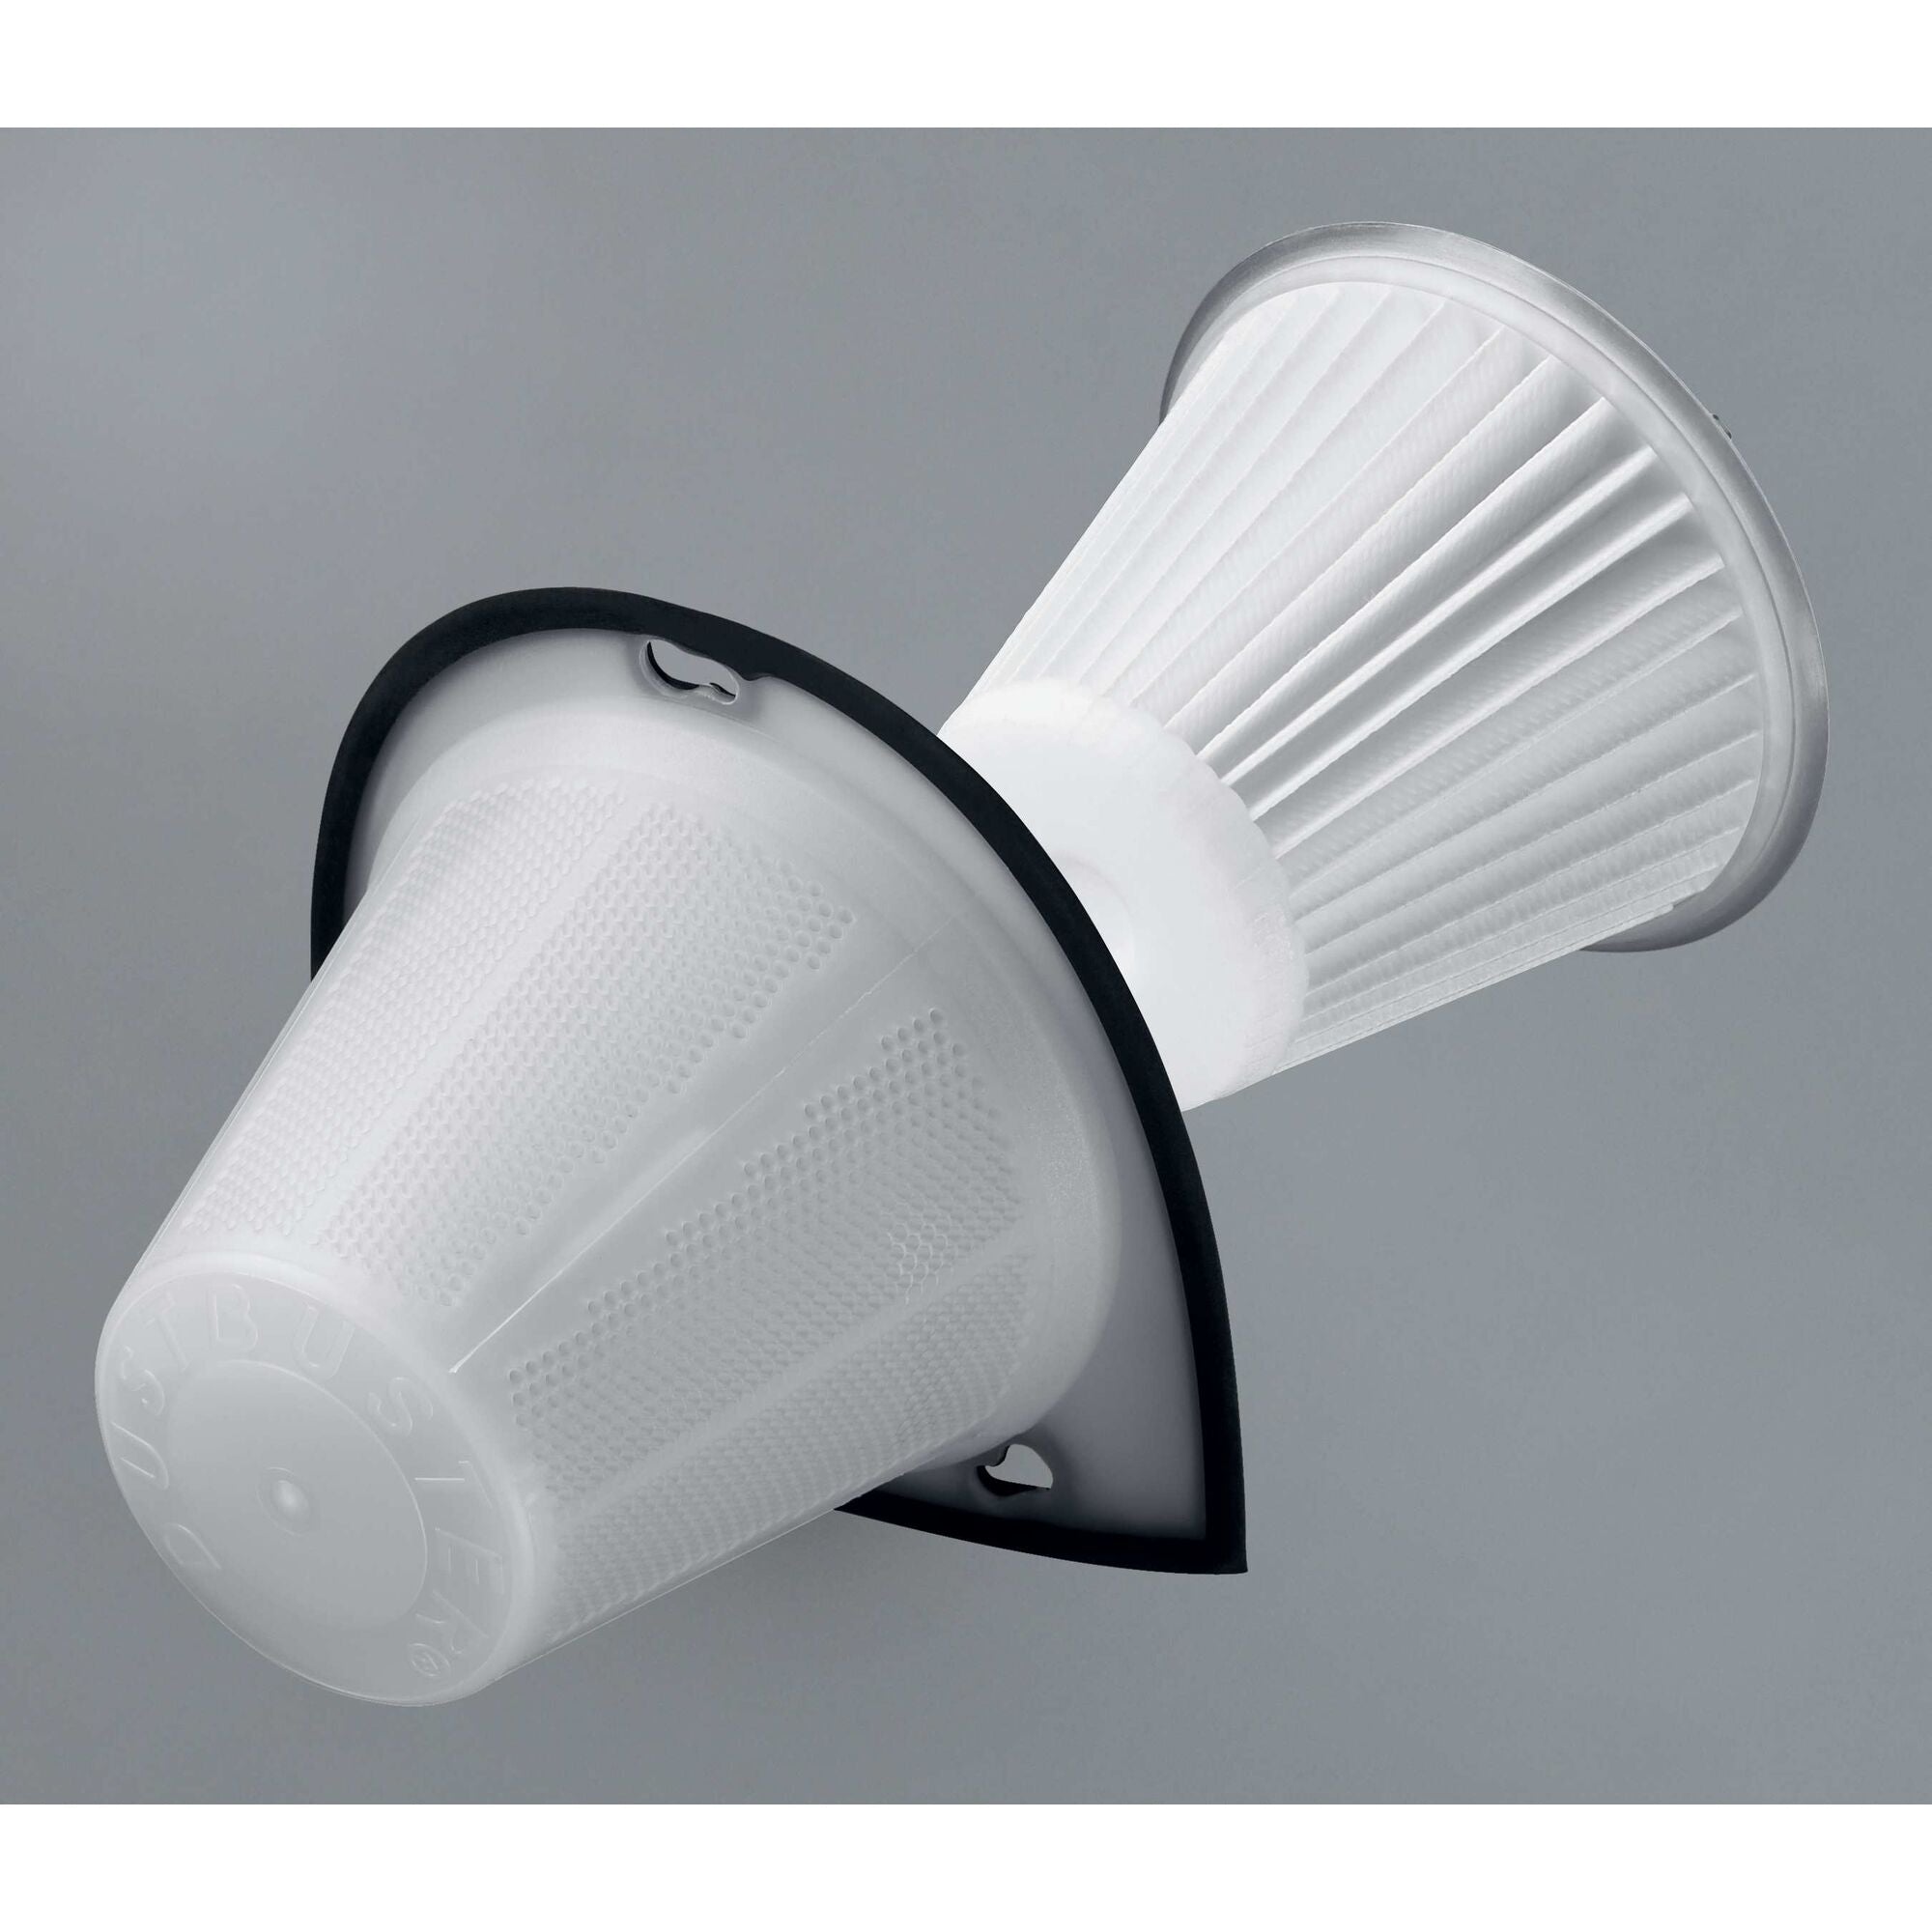 black and decker dustbuster filter from